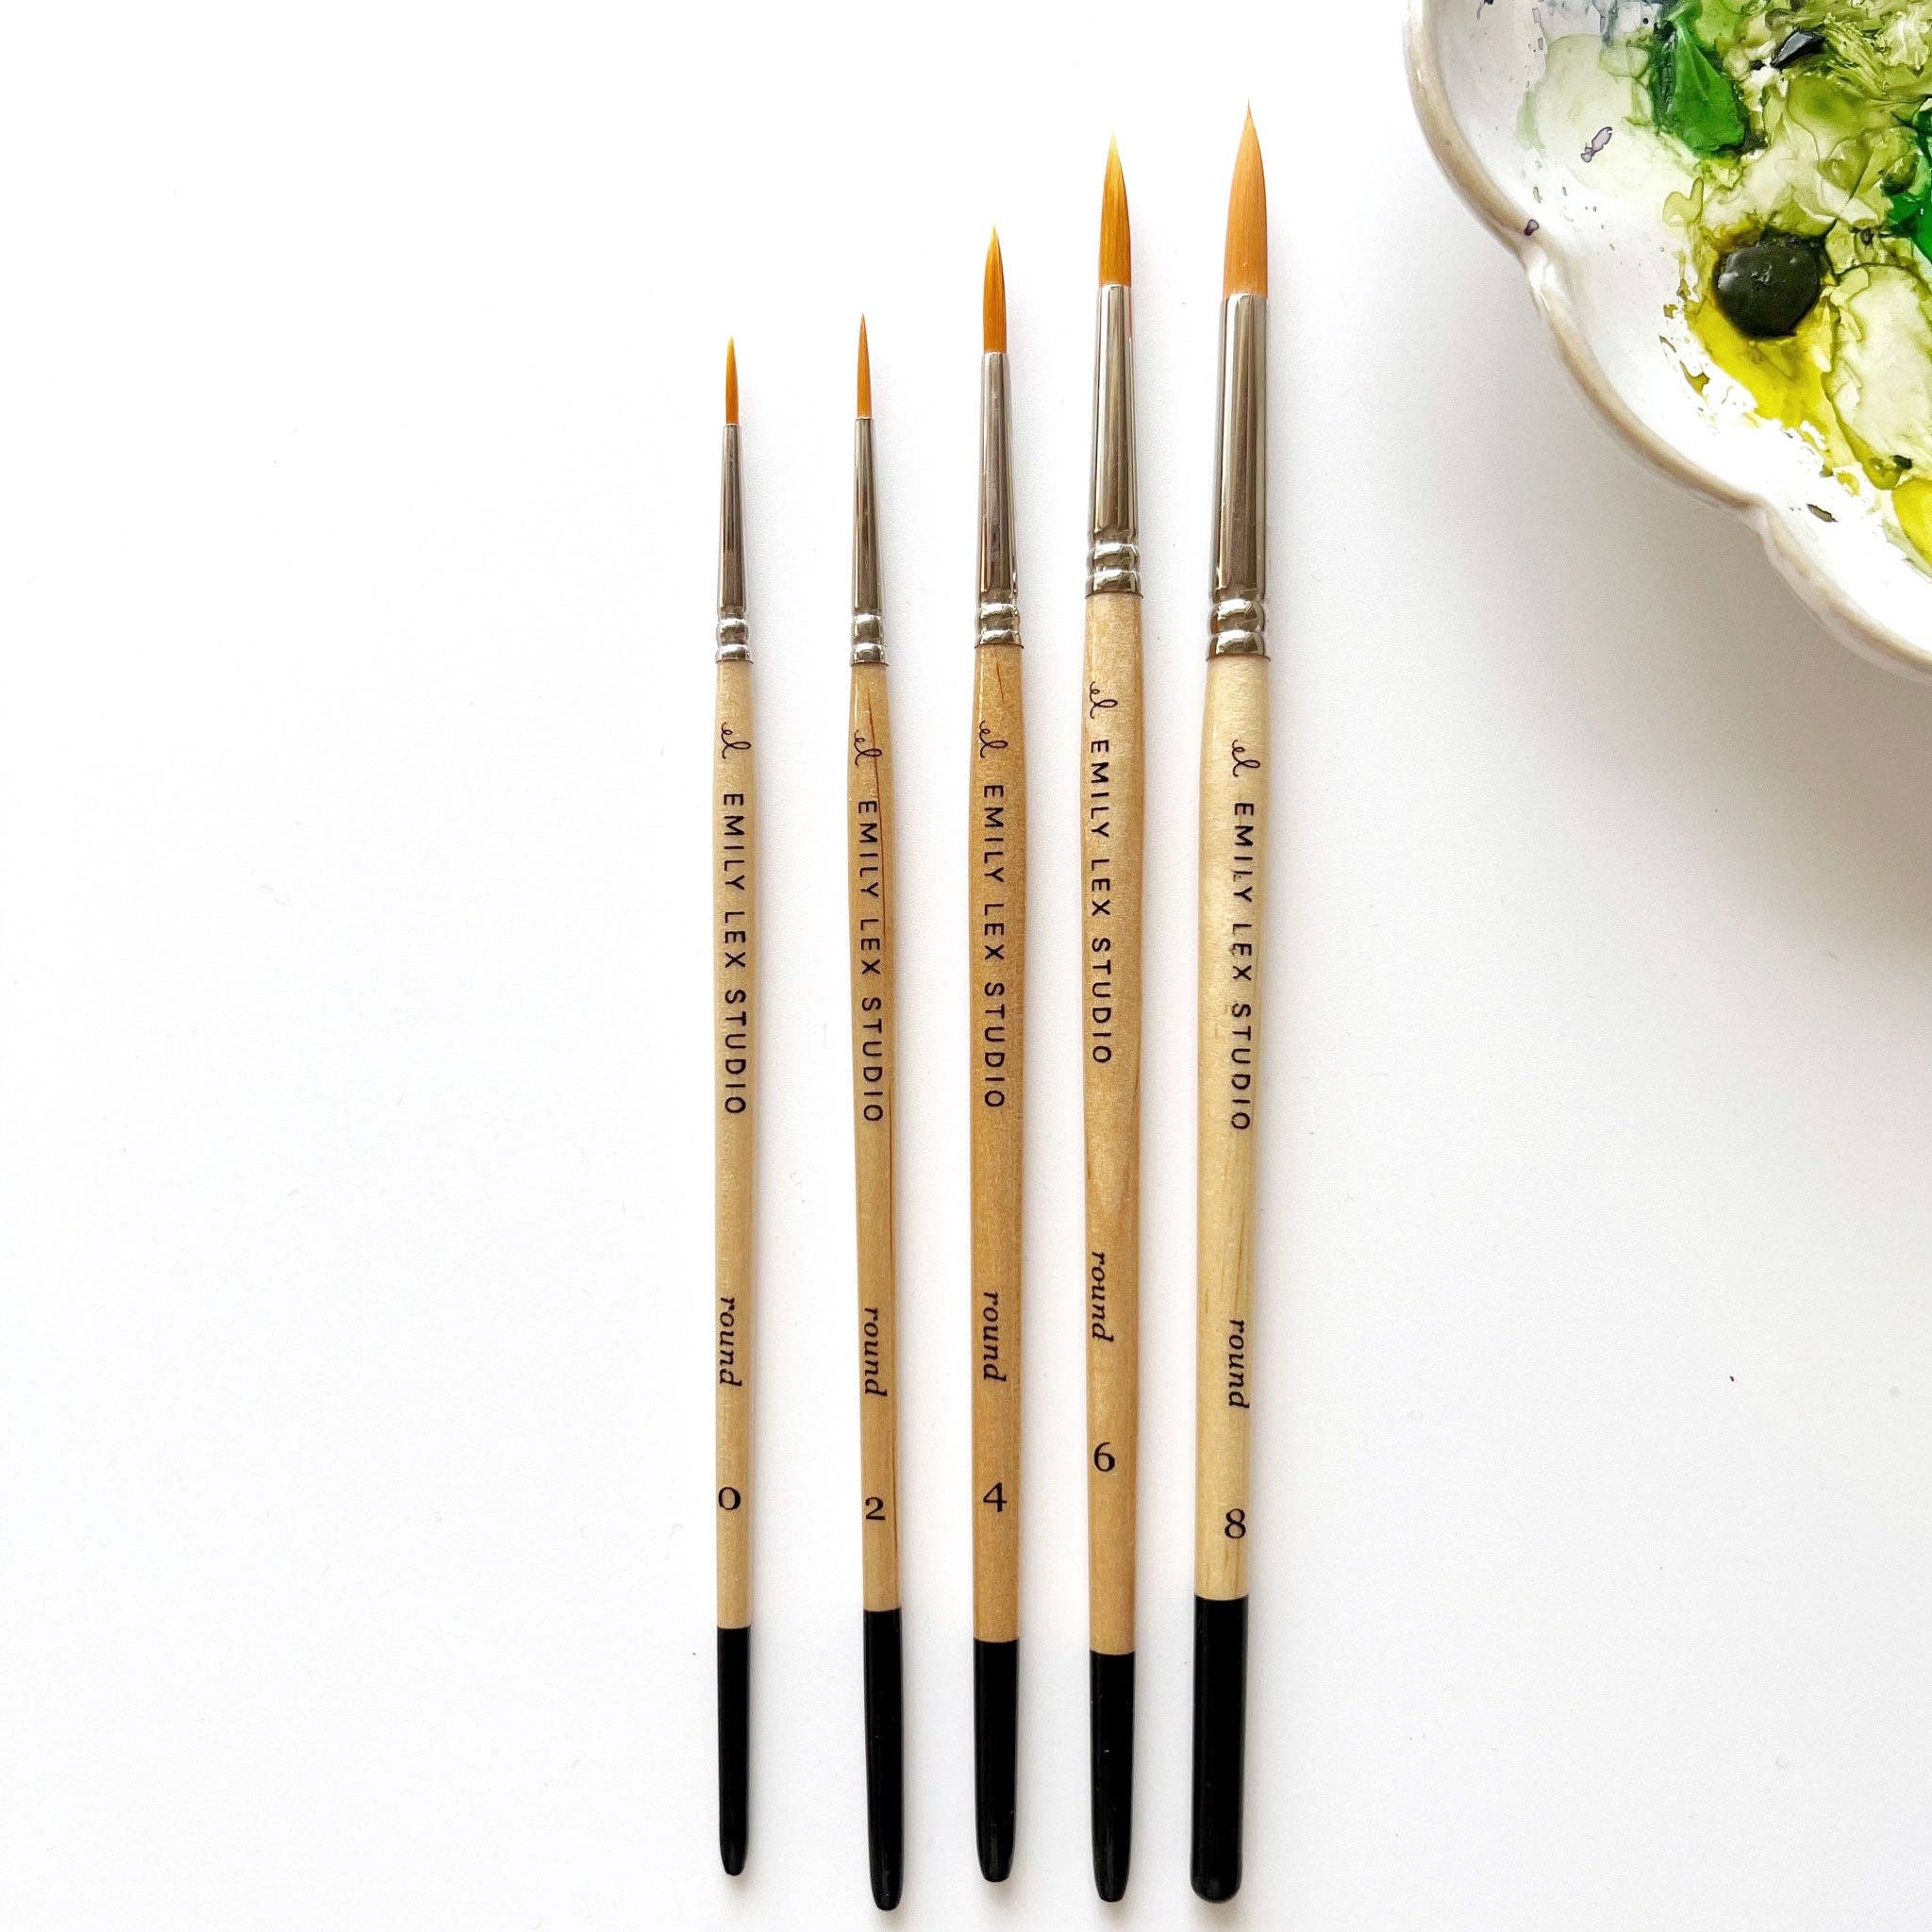 Wooden Watercolor Brushes Set in Various Sizes for Painting